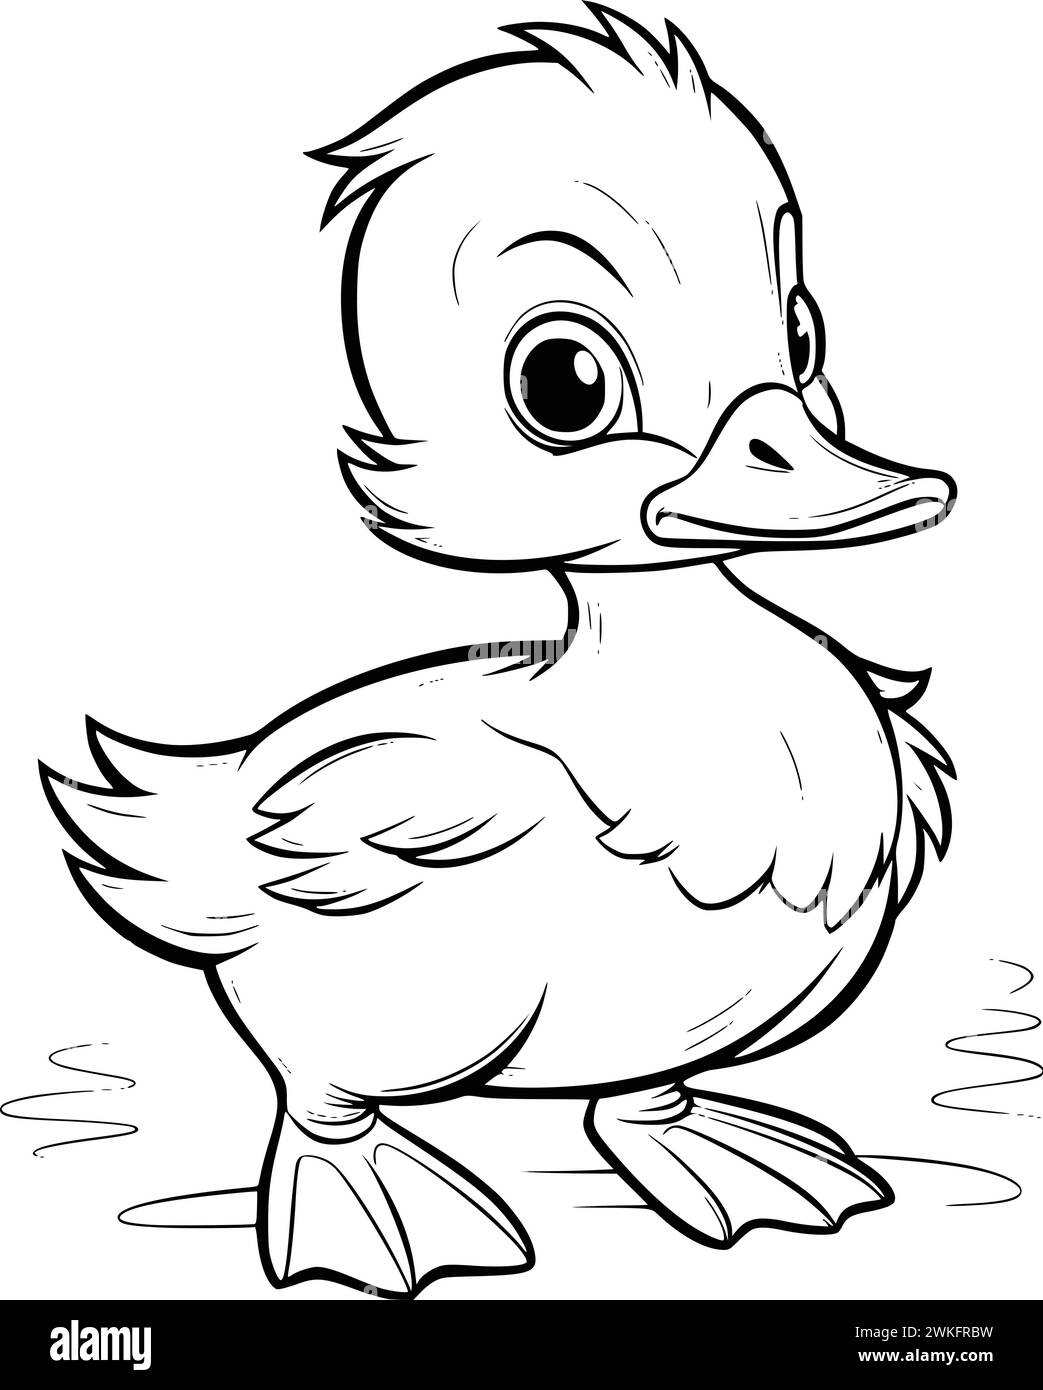 Baby Donald Duck playing with toy drum coloring page #disneybabies,  #babydonald, #donaldduck | Disney coloring pages, Cartoon coloring pages,  Coloring pages